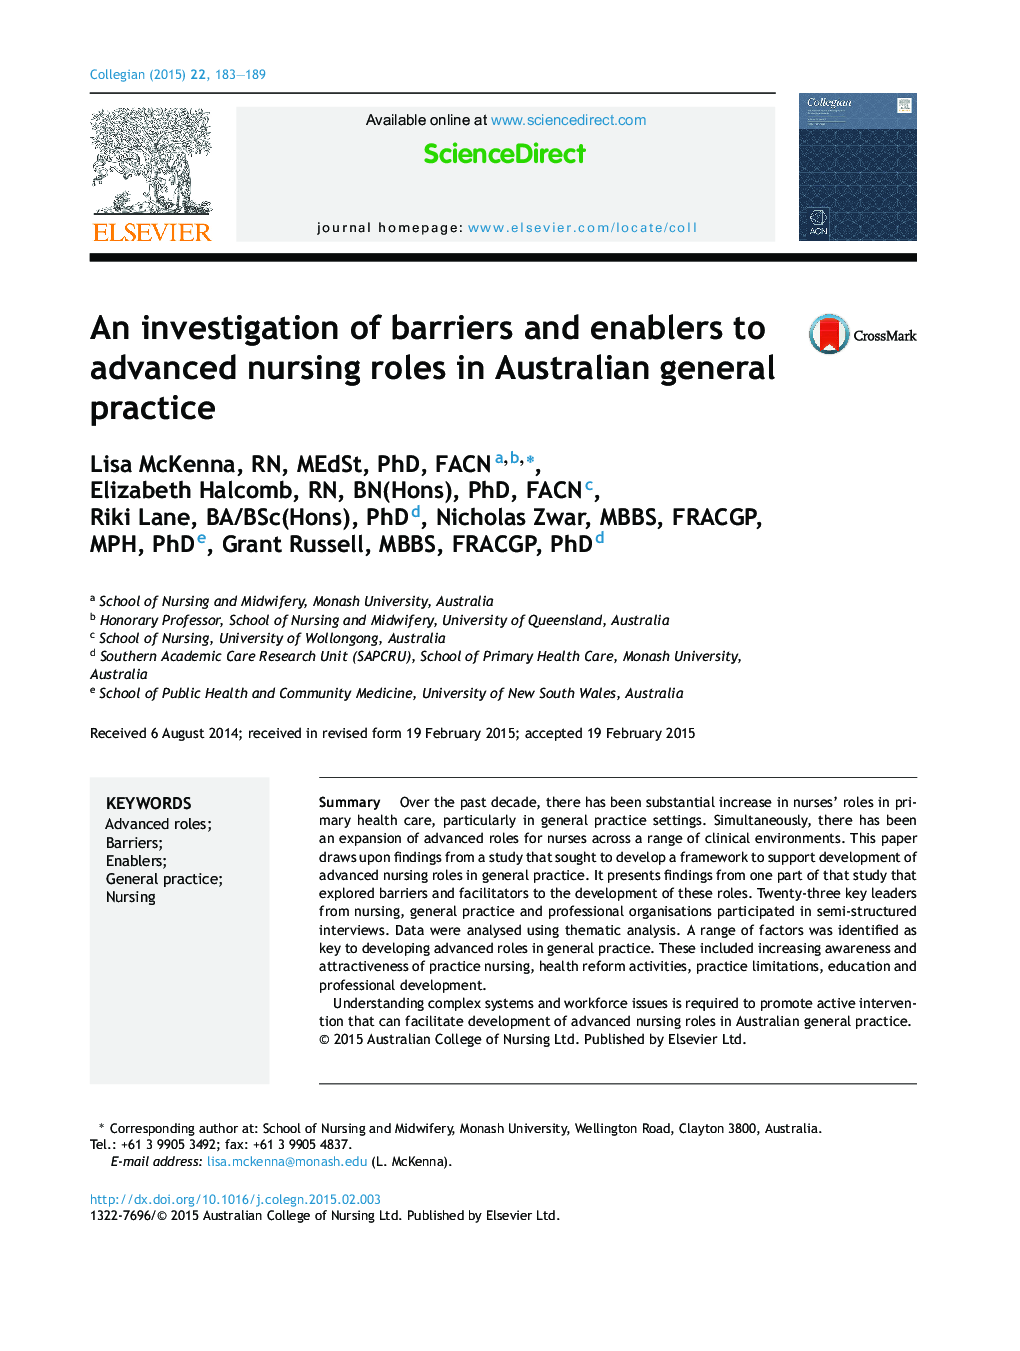 An investigation of barriers and enablers to advanced nursing roles in Australian general practice